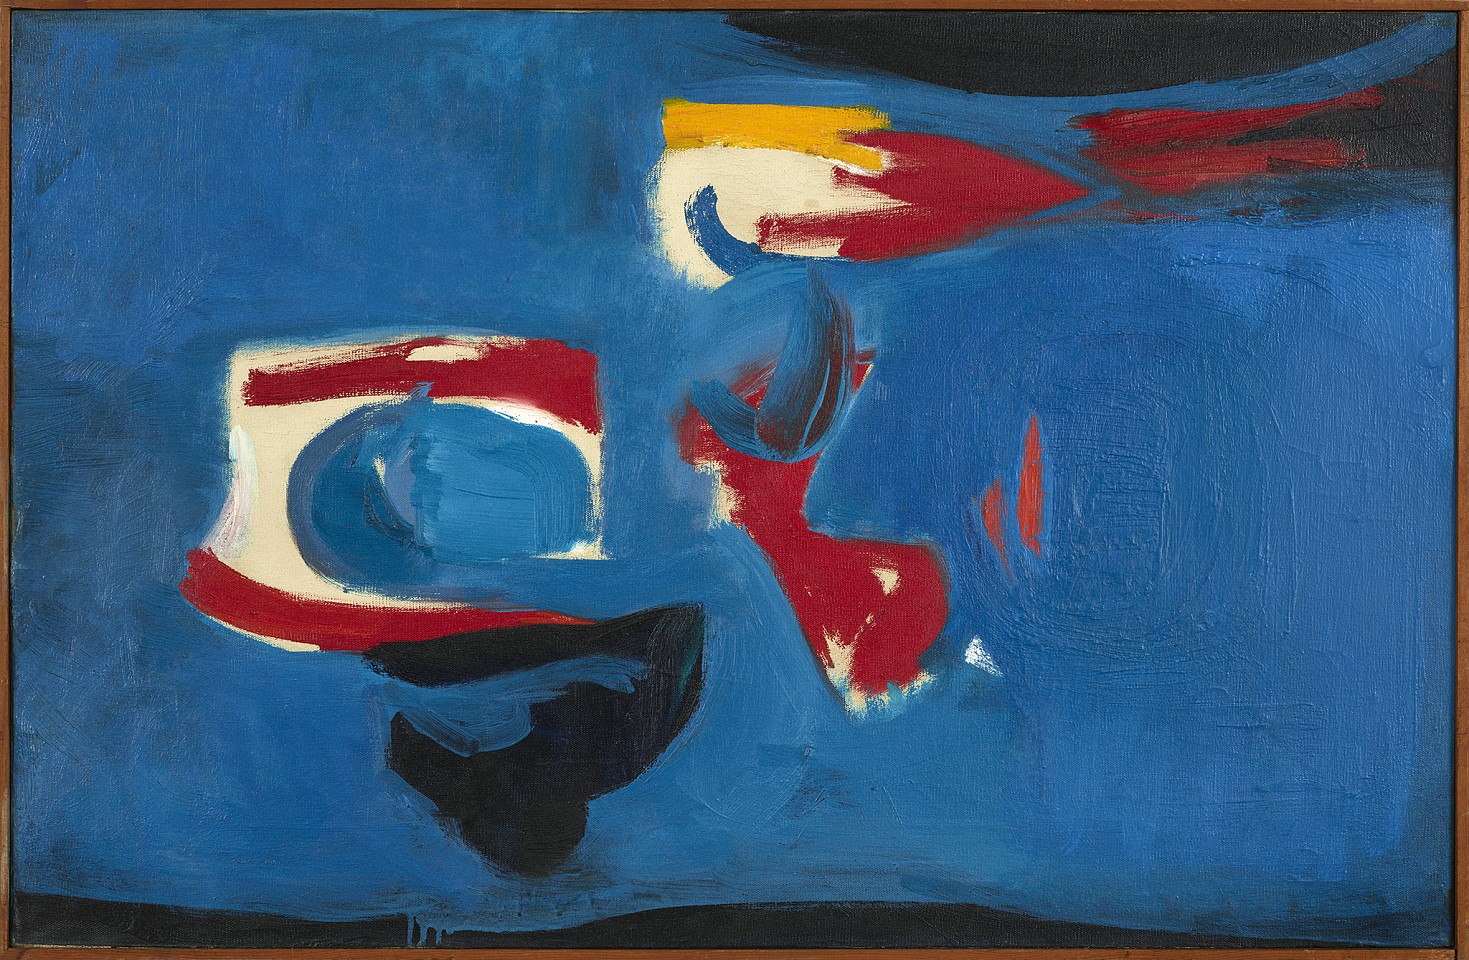 Jean Cohen, Outer Space Jumping Jacks, 1968
Oil on canvas, 22 x 34 in. (55.9 x 86.4 cm)
JCOH-00016